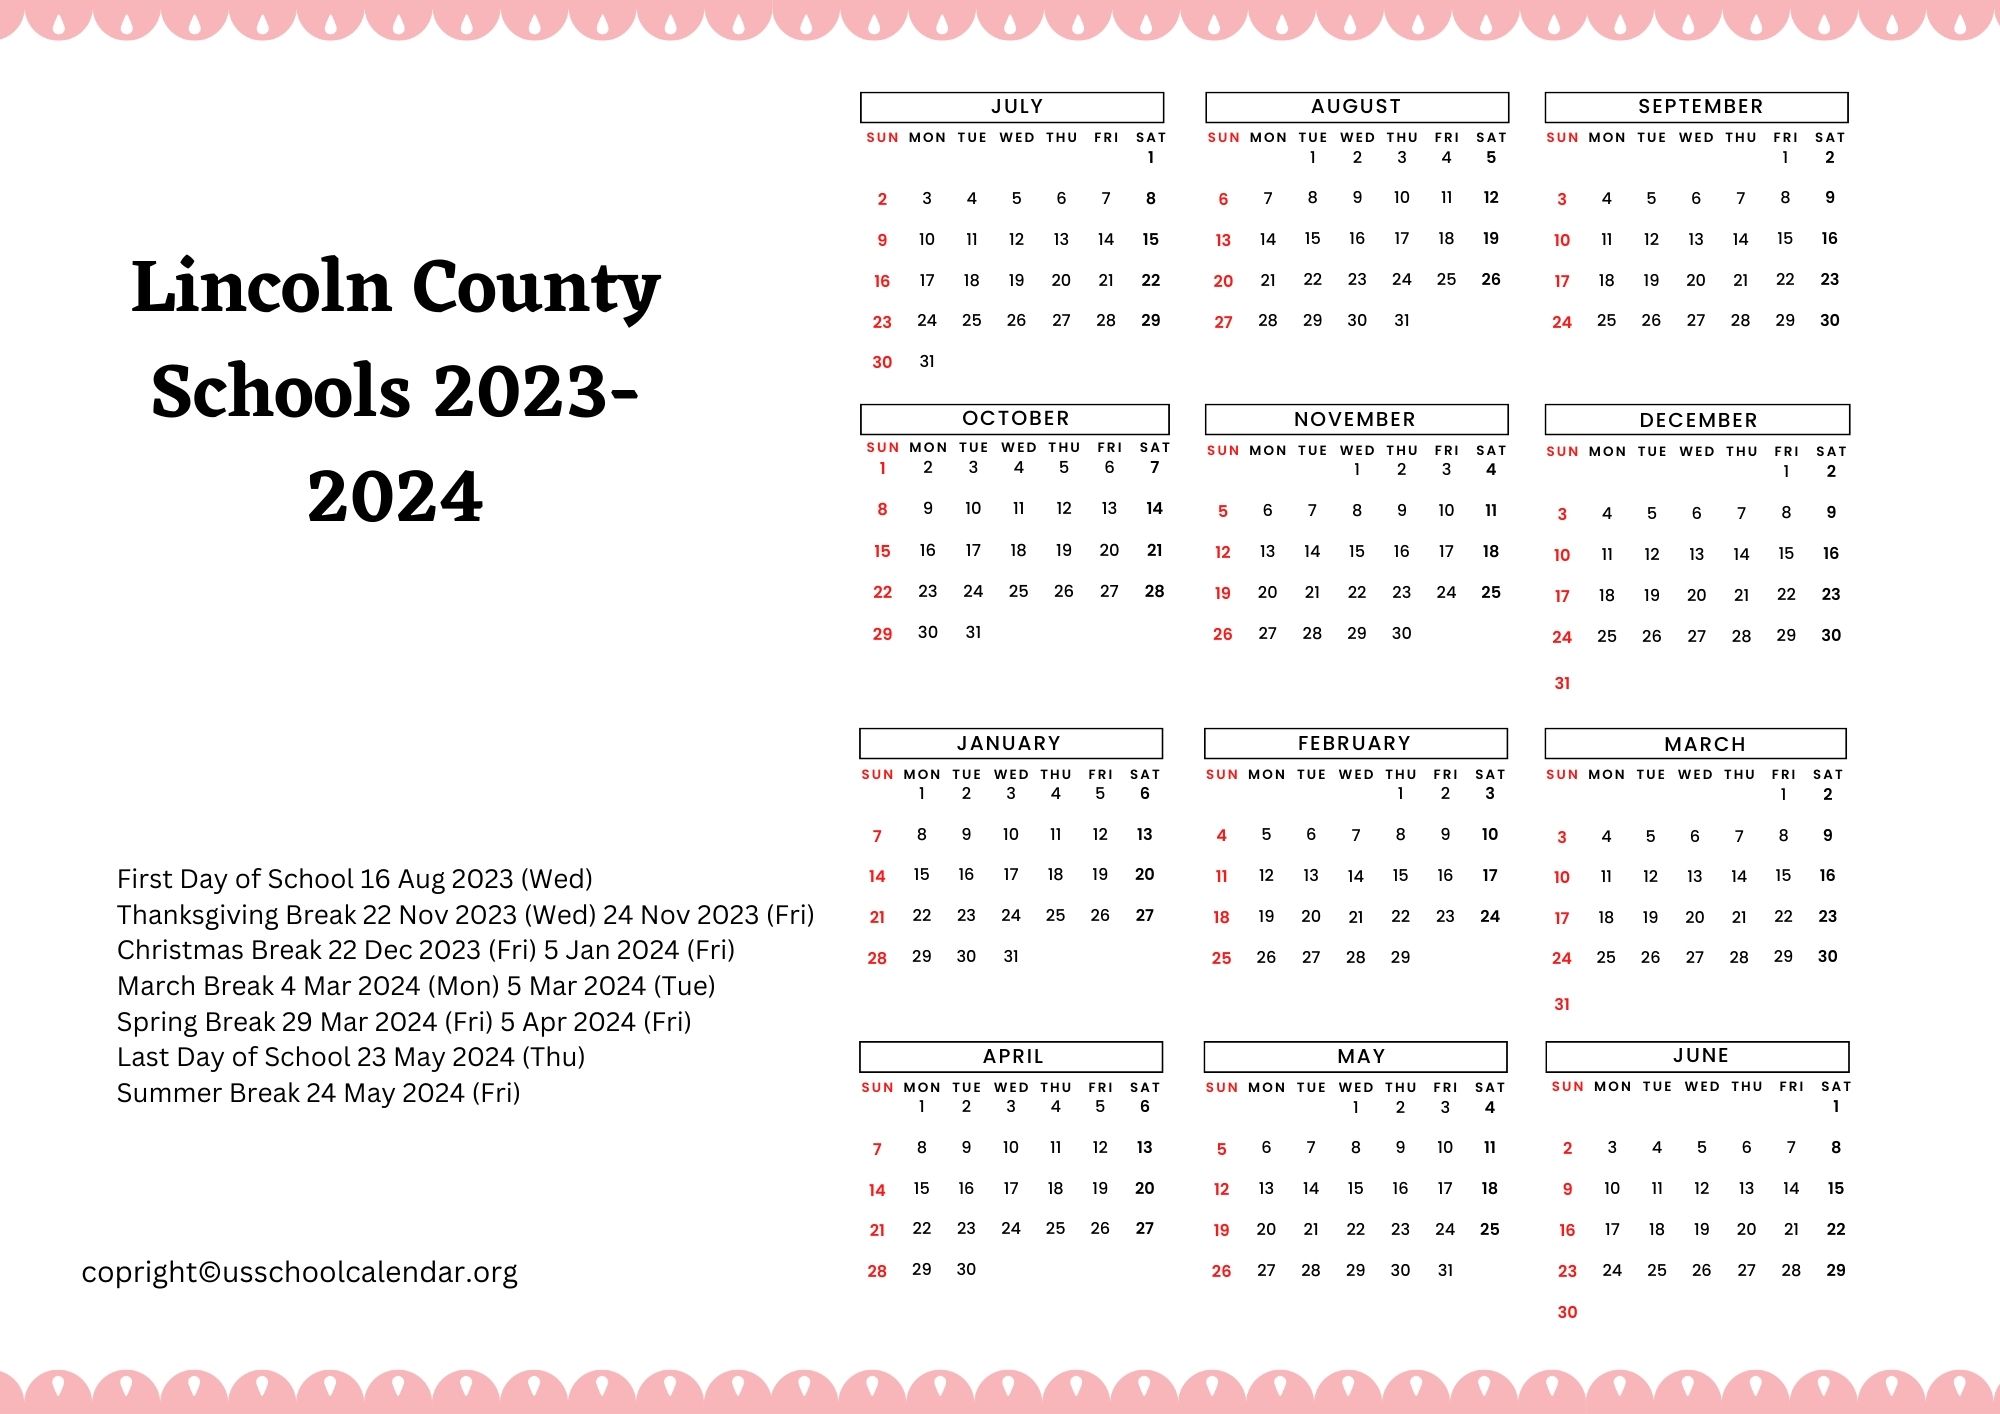 Lincoln County Schools Calendar with Holidays 2023 2024